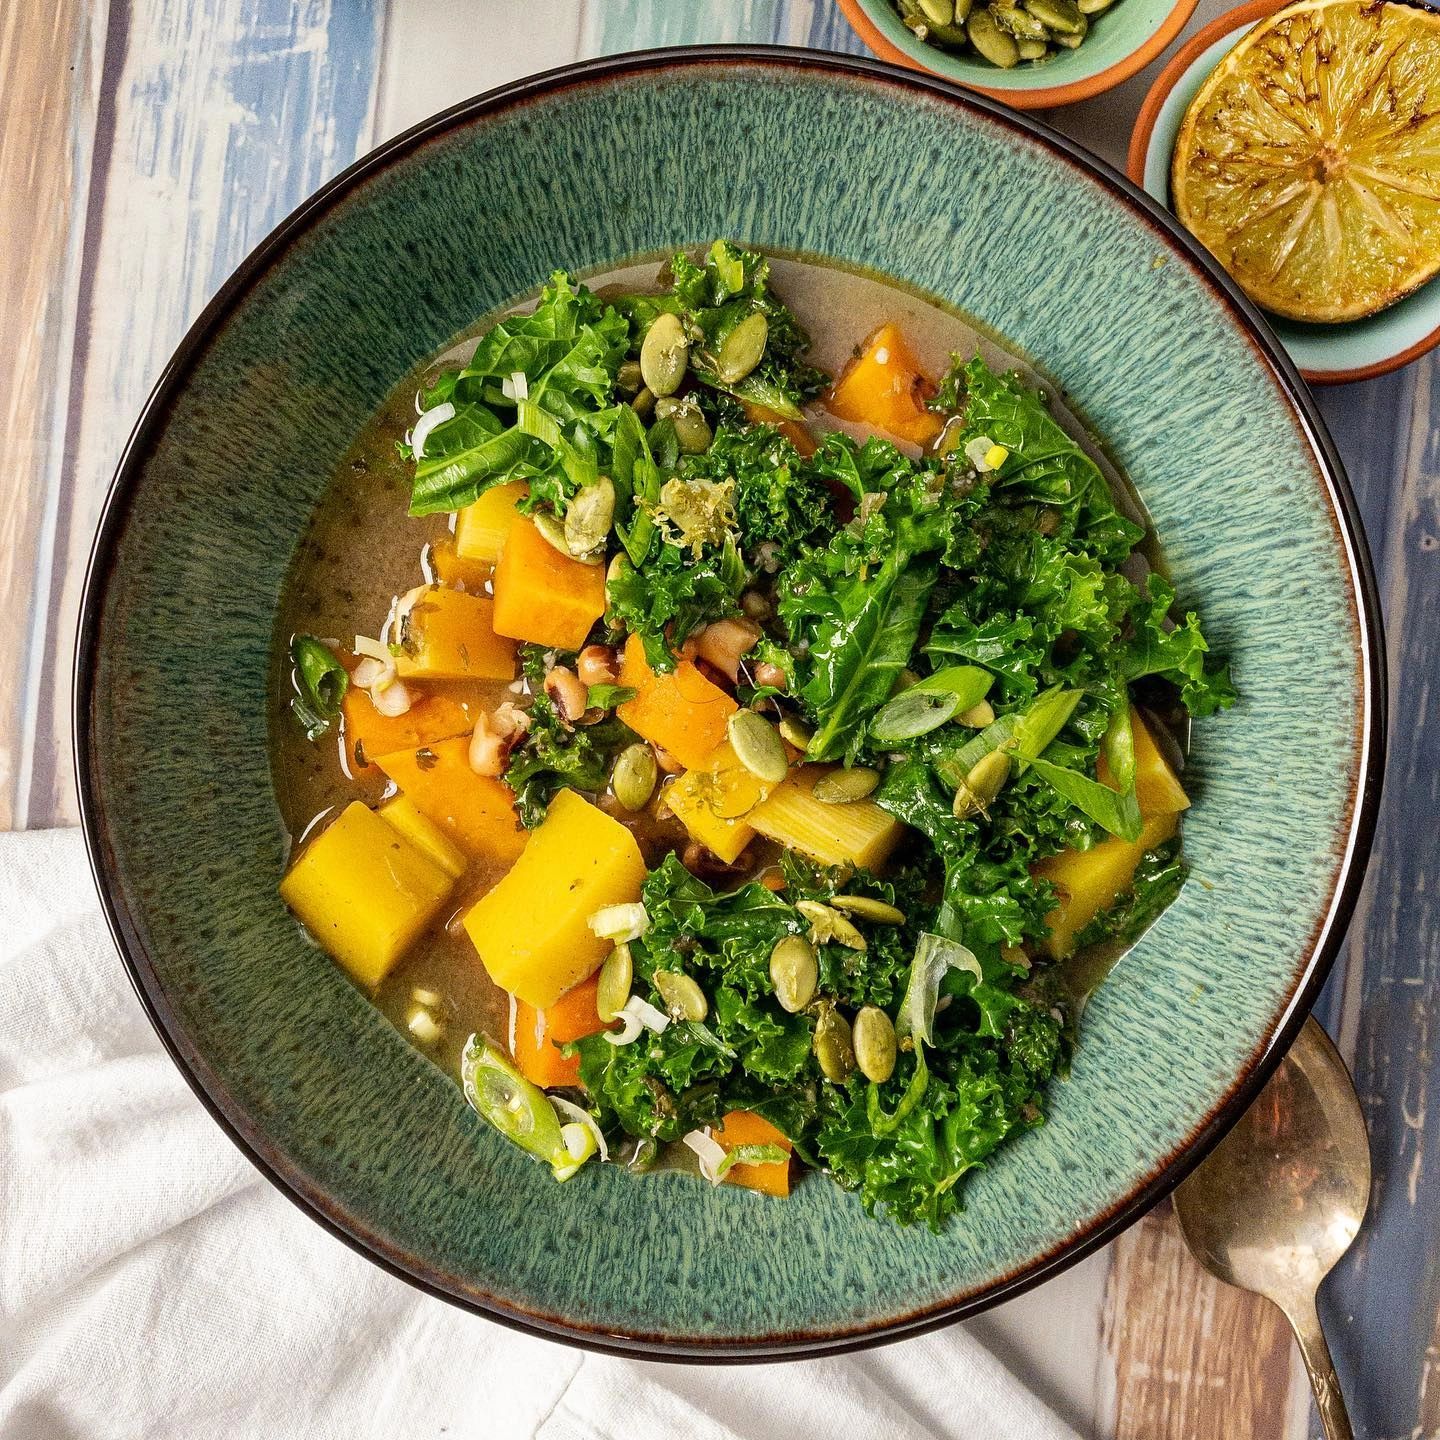 3 Insanely Good Vegetarian Recipes From Anna Jones's 'One: Pot, Pan, Planet